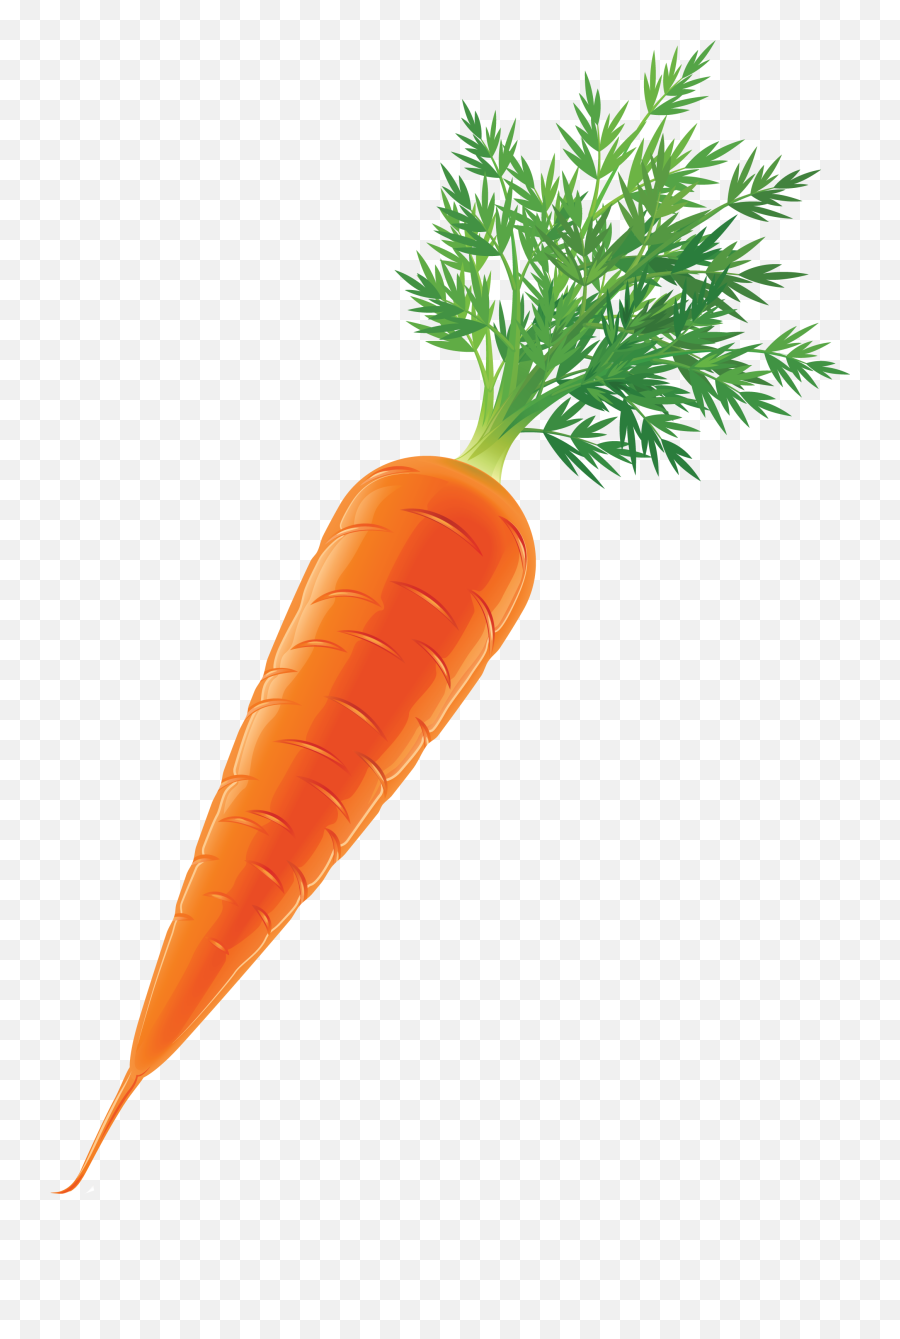 Free Transparent Carrot Png Download - Real Pictures Of Vegetables,Carrot Transparent